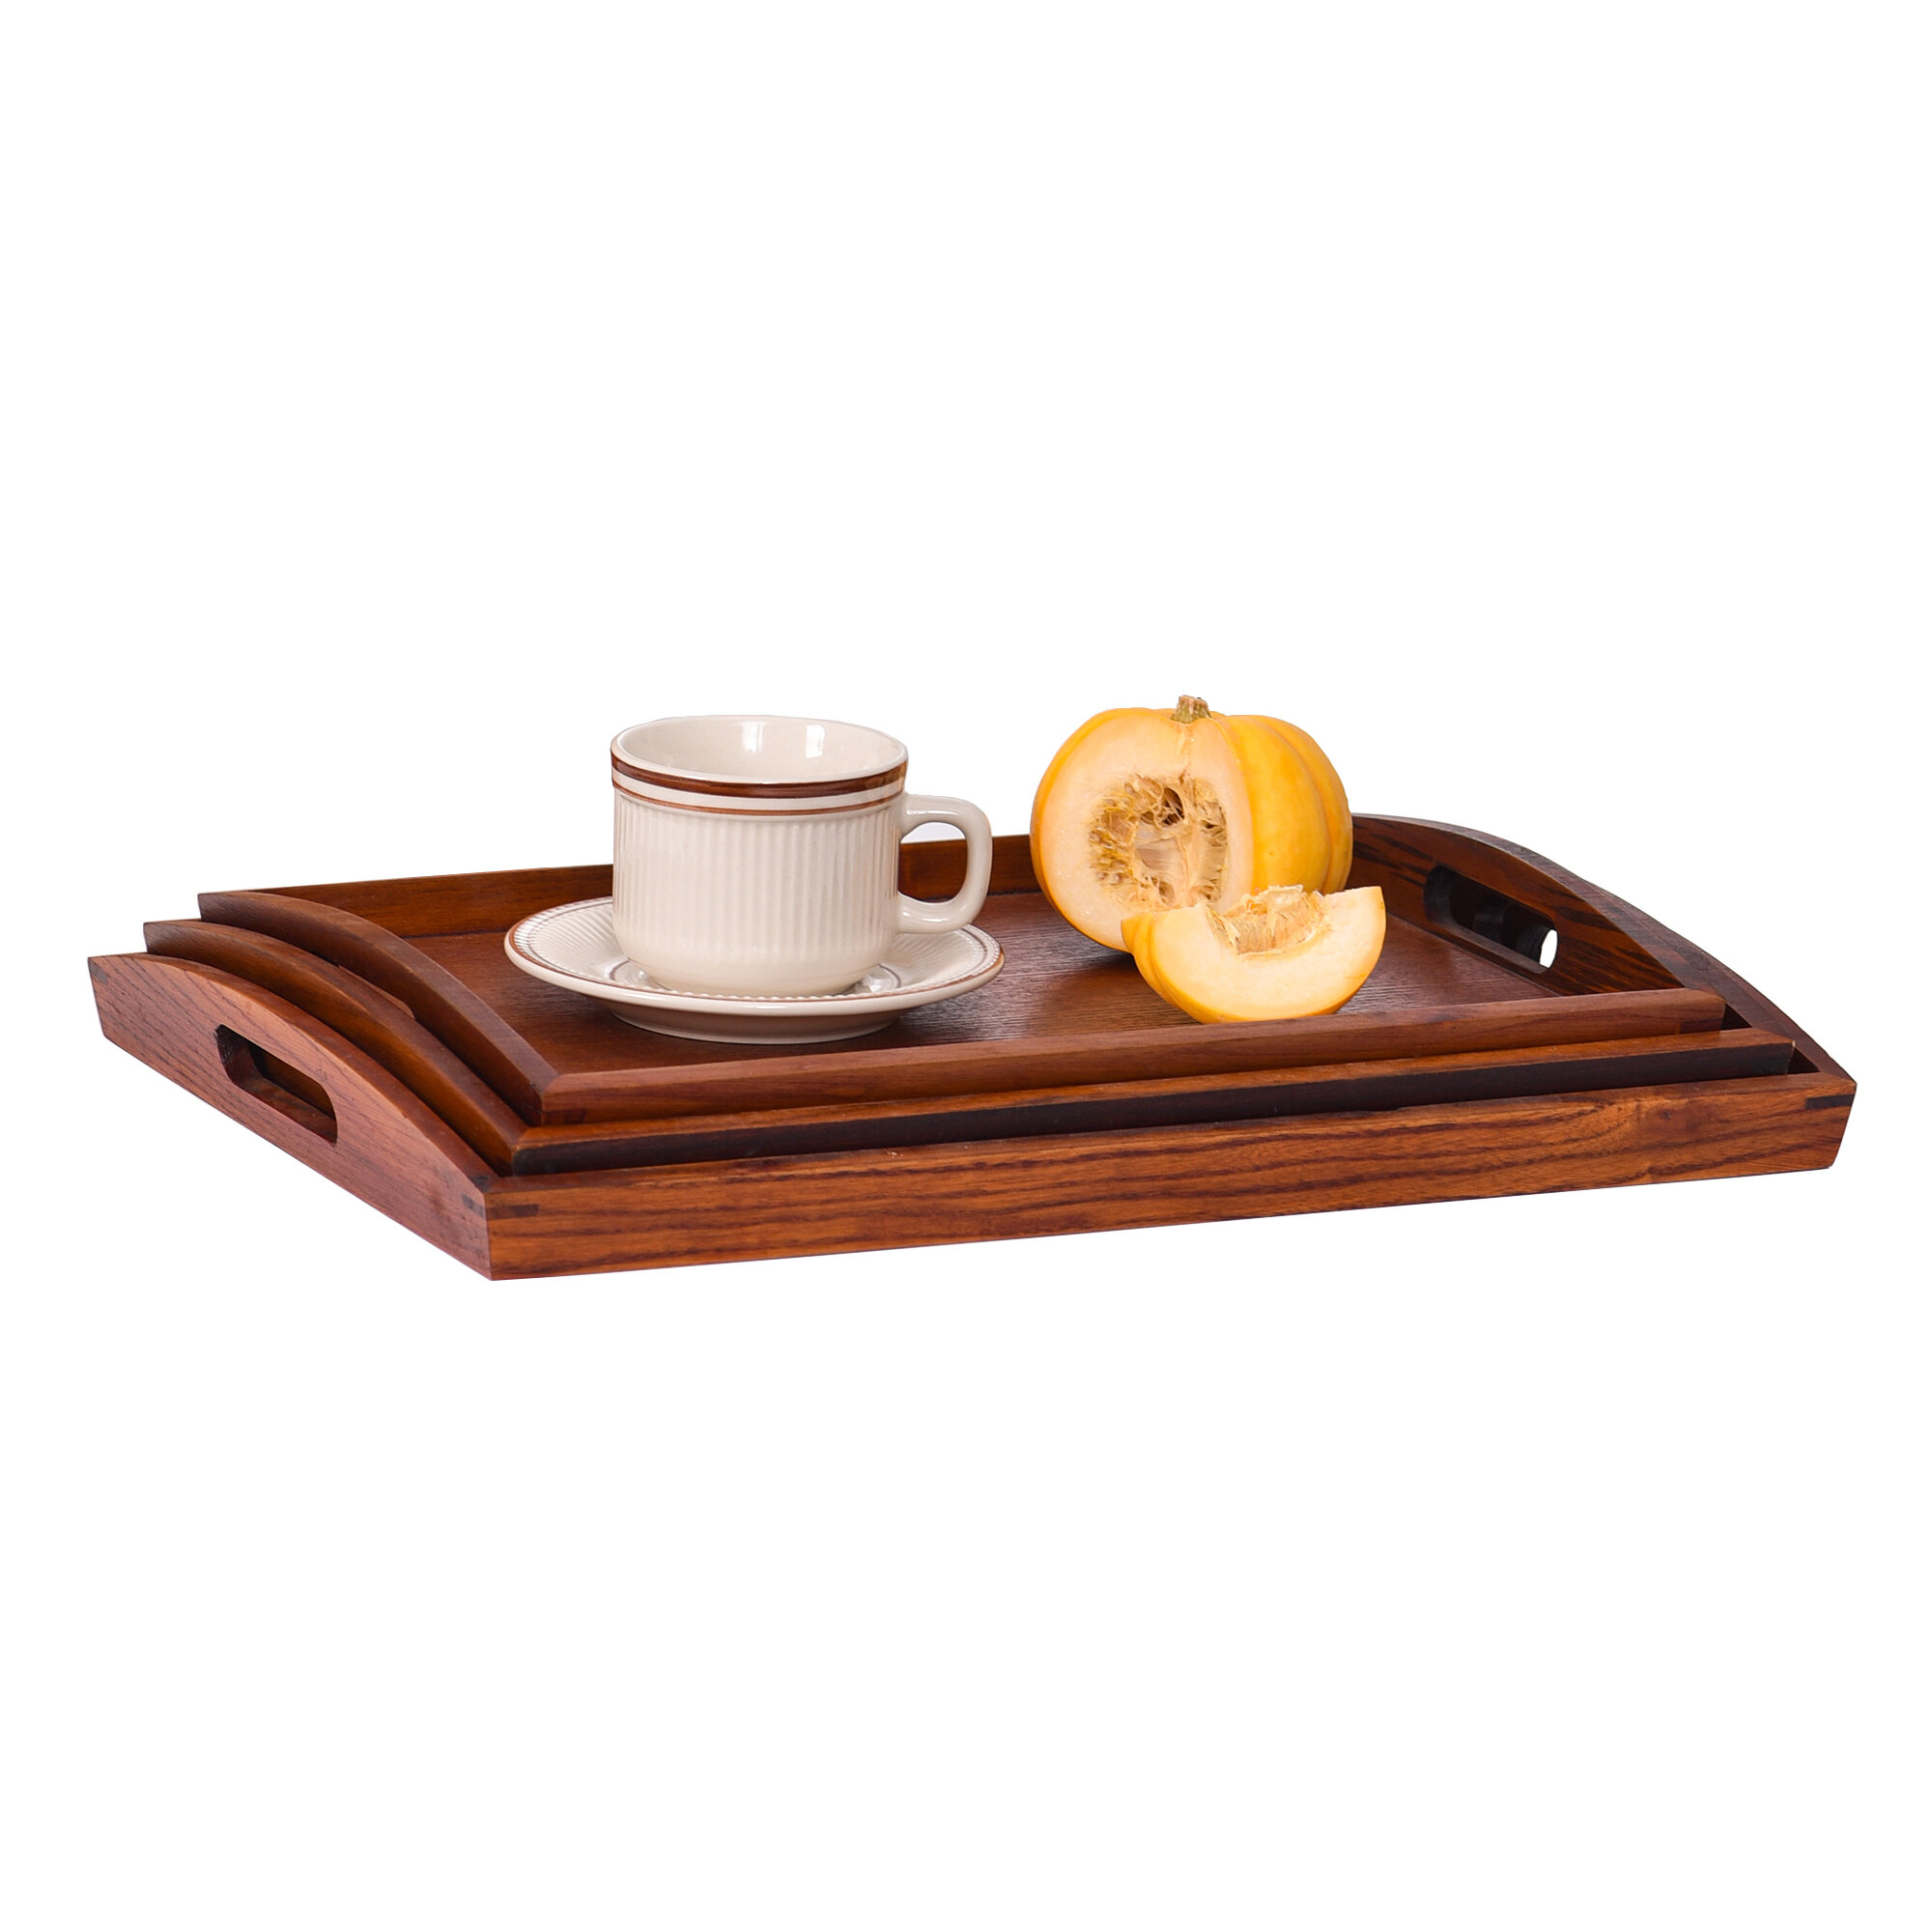 Bamboo Round Plates 27cm-Black Wood Serving Tray Decorative Serving Tray Coffee Table Tray Breakfast Trays